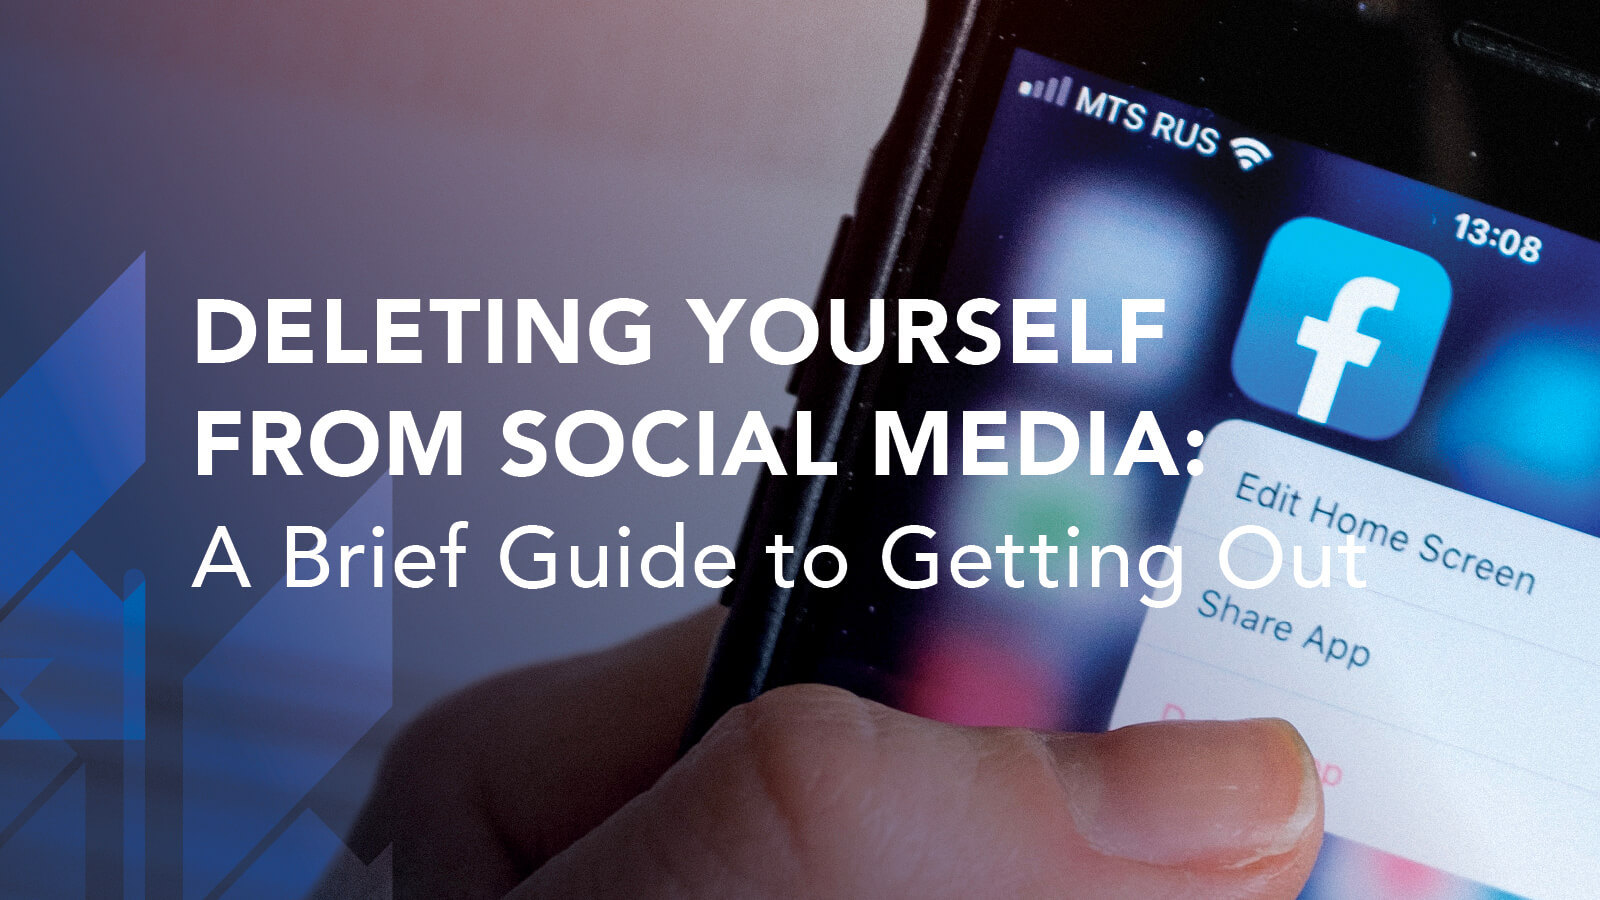 Deleting Yourself From Social Media A Brief Guide to Get Out